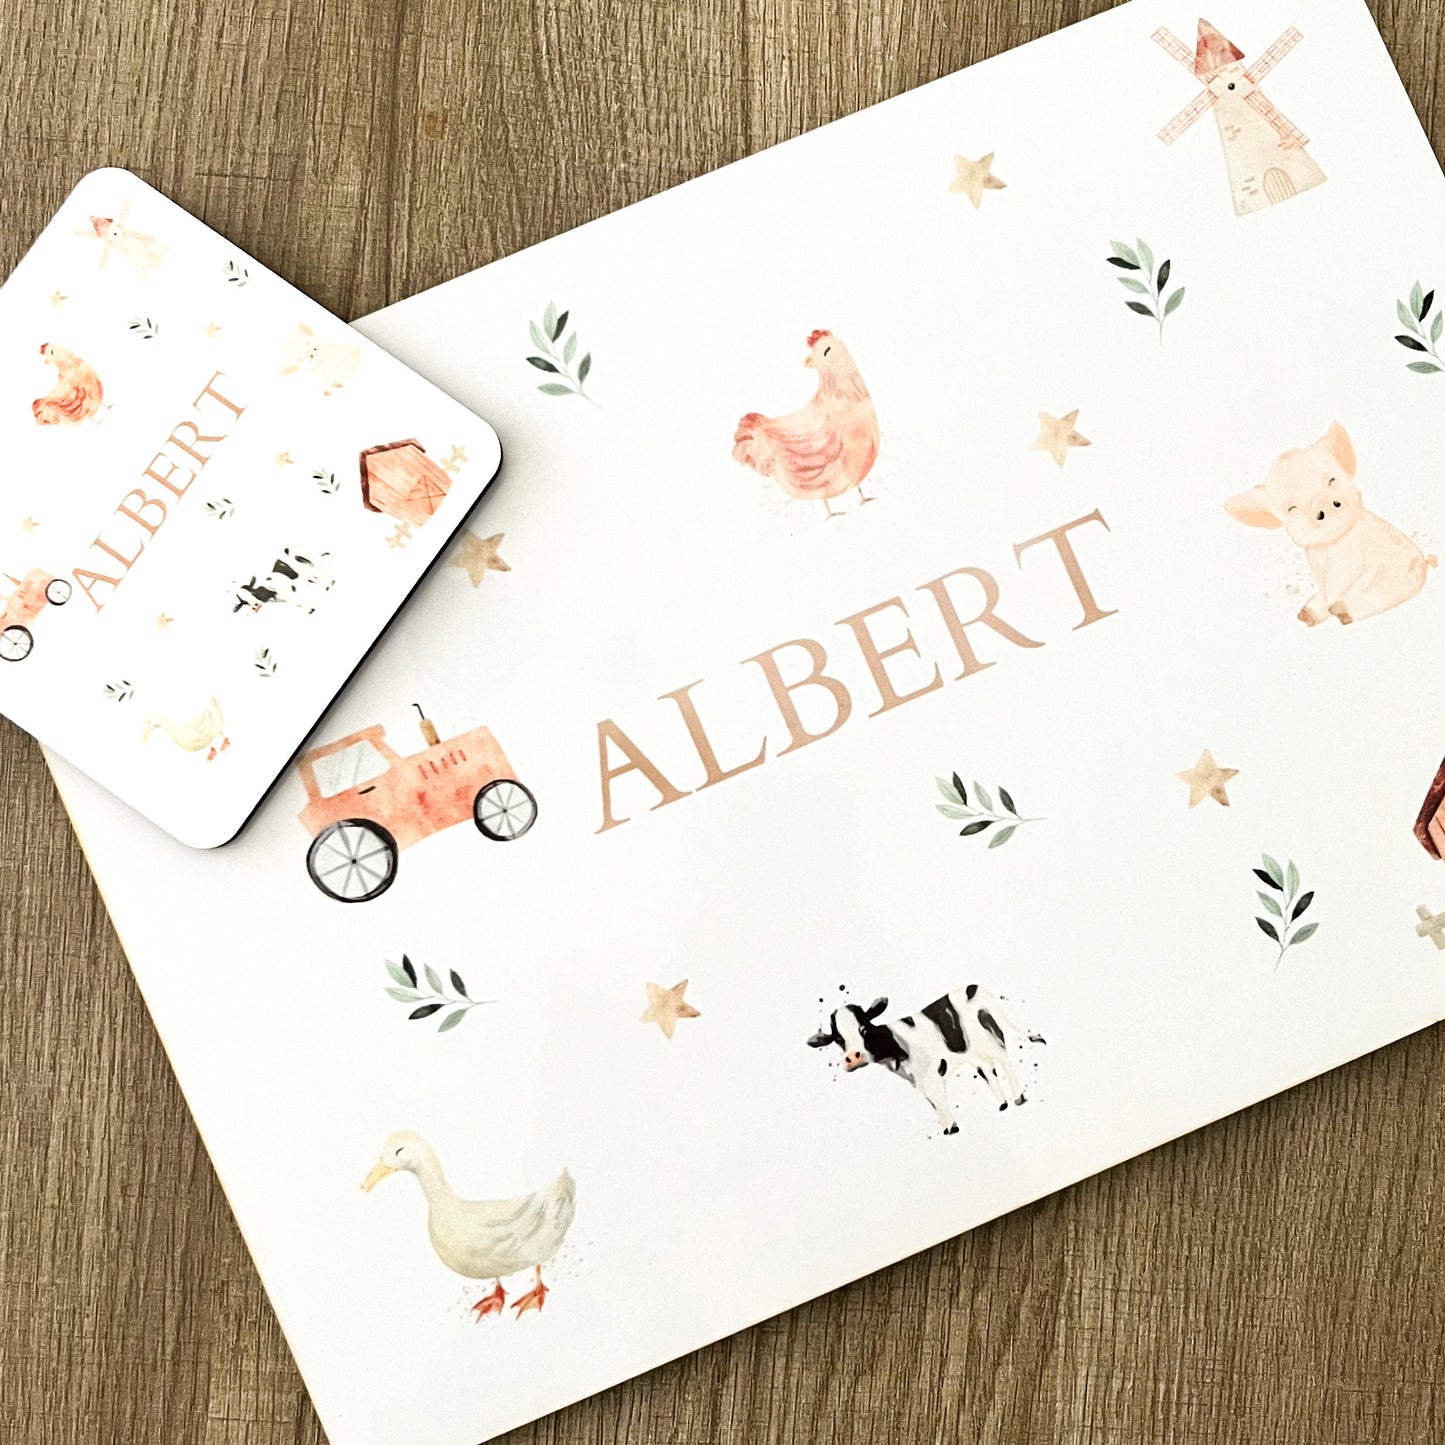 Children’s Personalised Placemat and Coaster Set - Farm Design